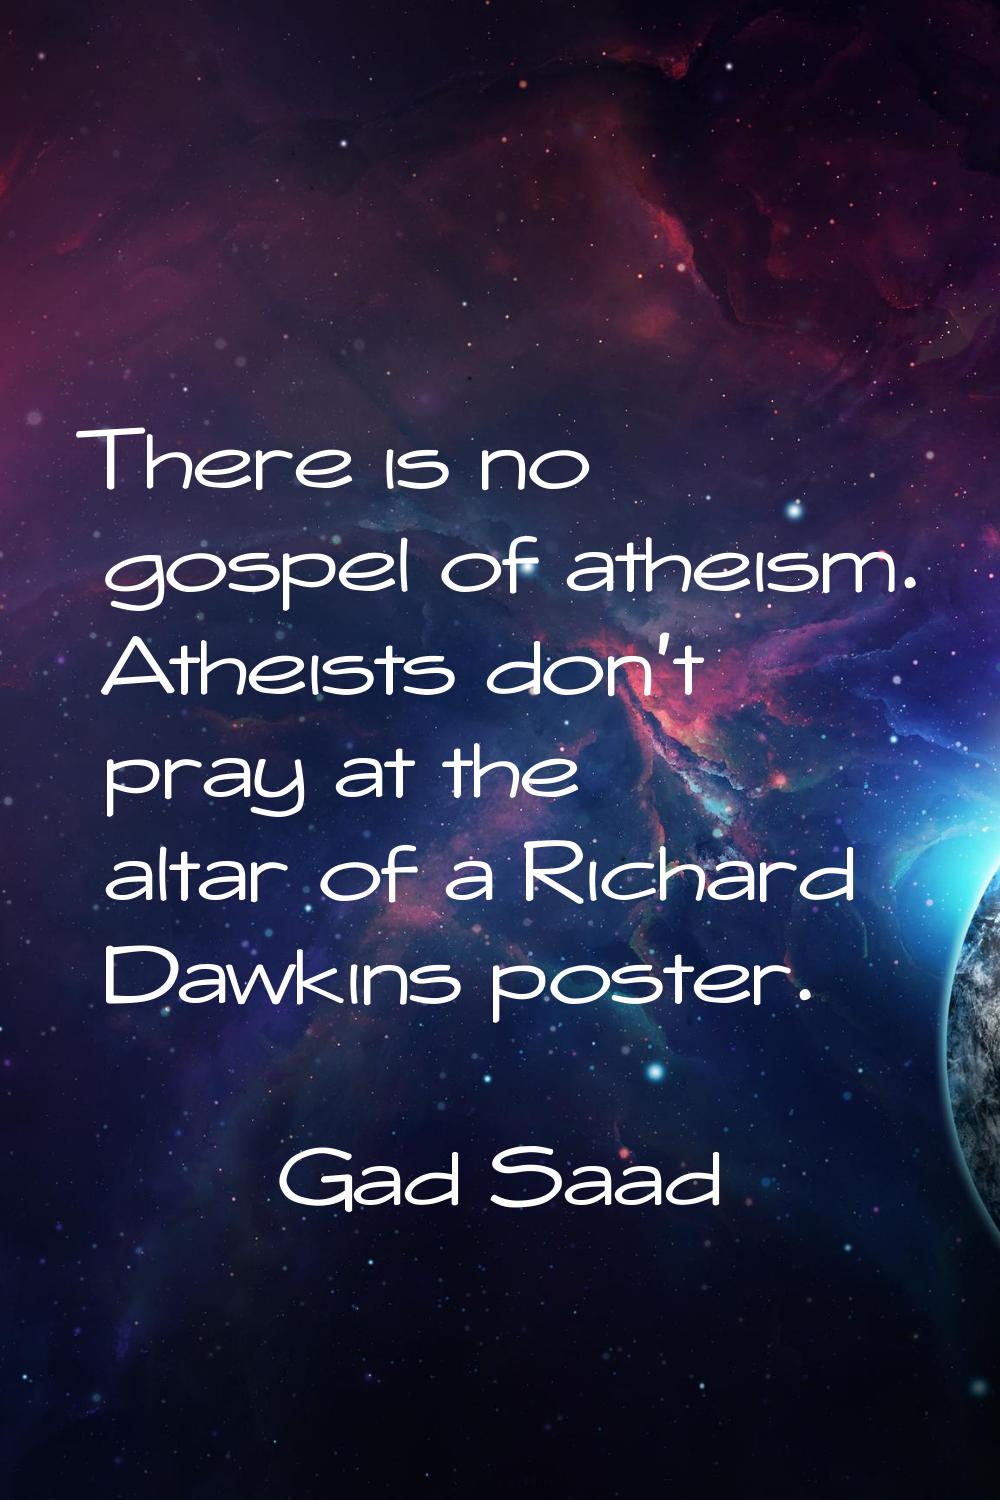 There is no gospel of atheism. Atheists don't pray at the altar of a Richard Dawkins poster.